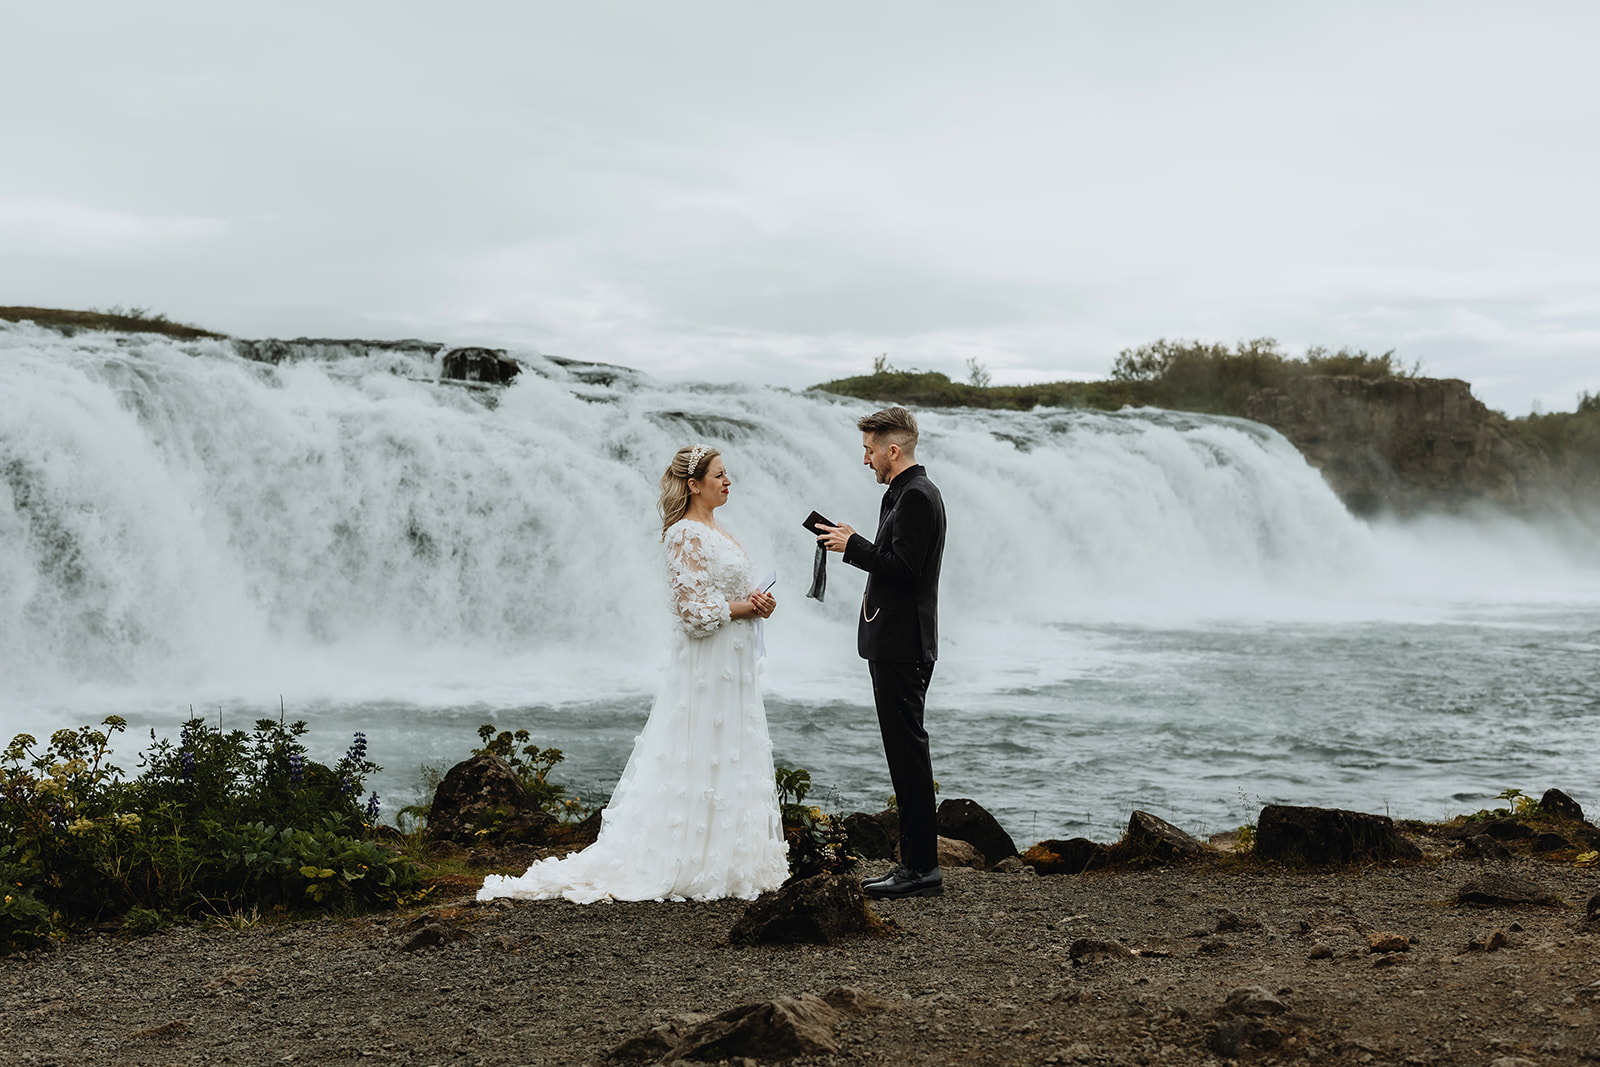 Waterfall ceremony in Iceland. Bride and groom are standing in front of a waterfall and exchanging their vows.